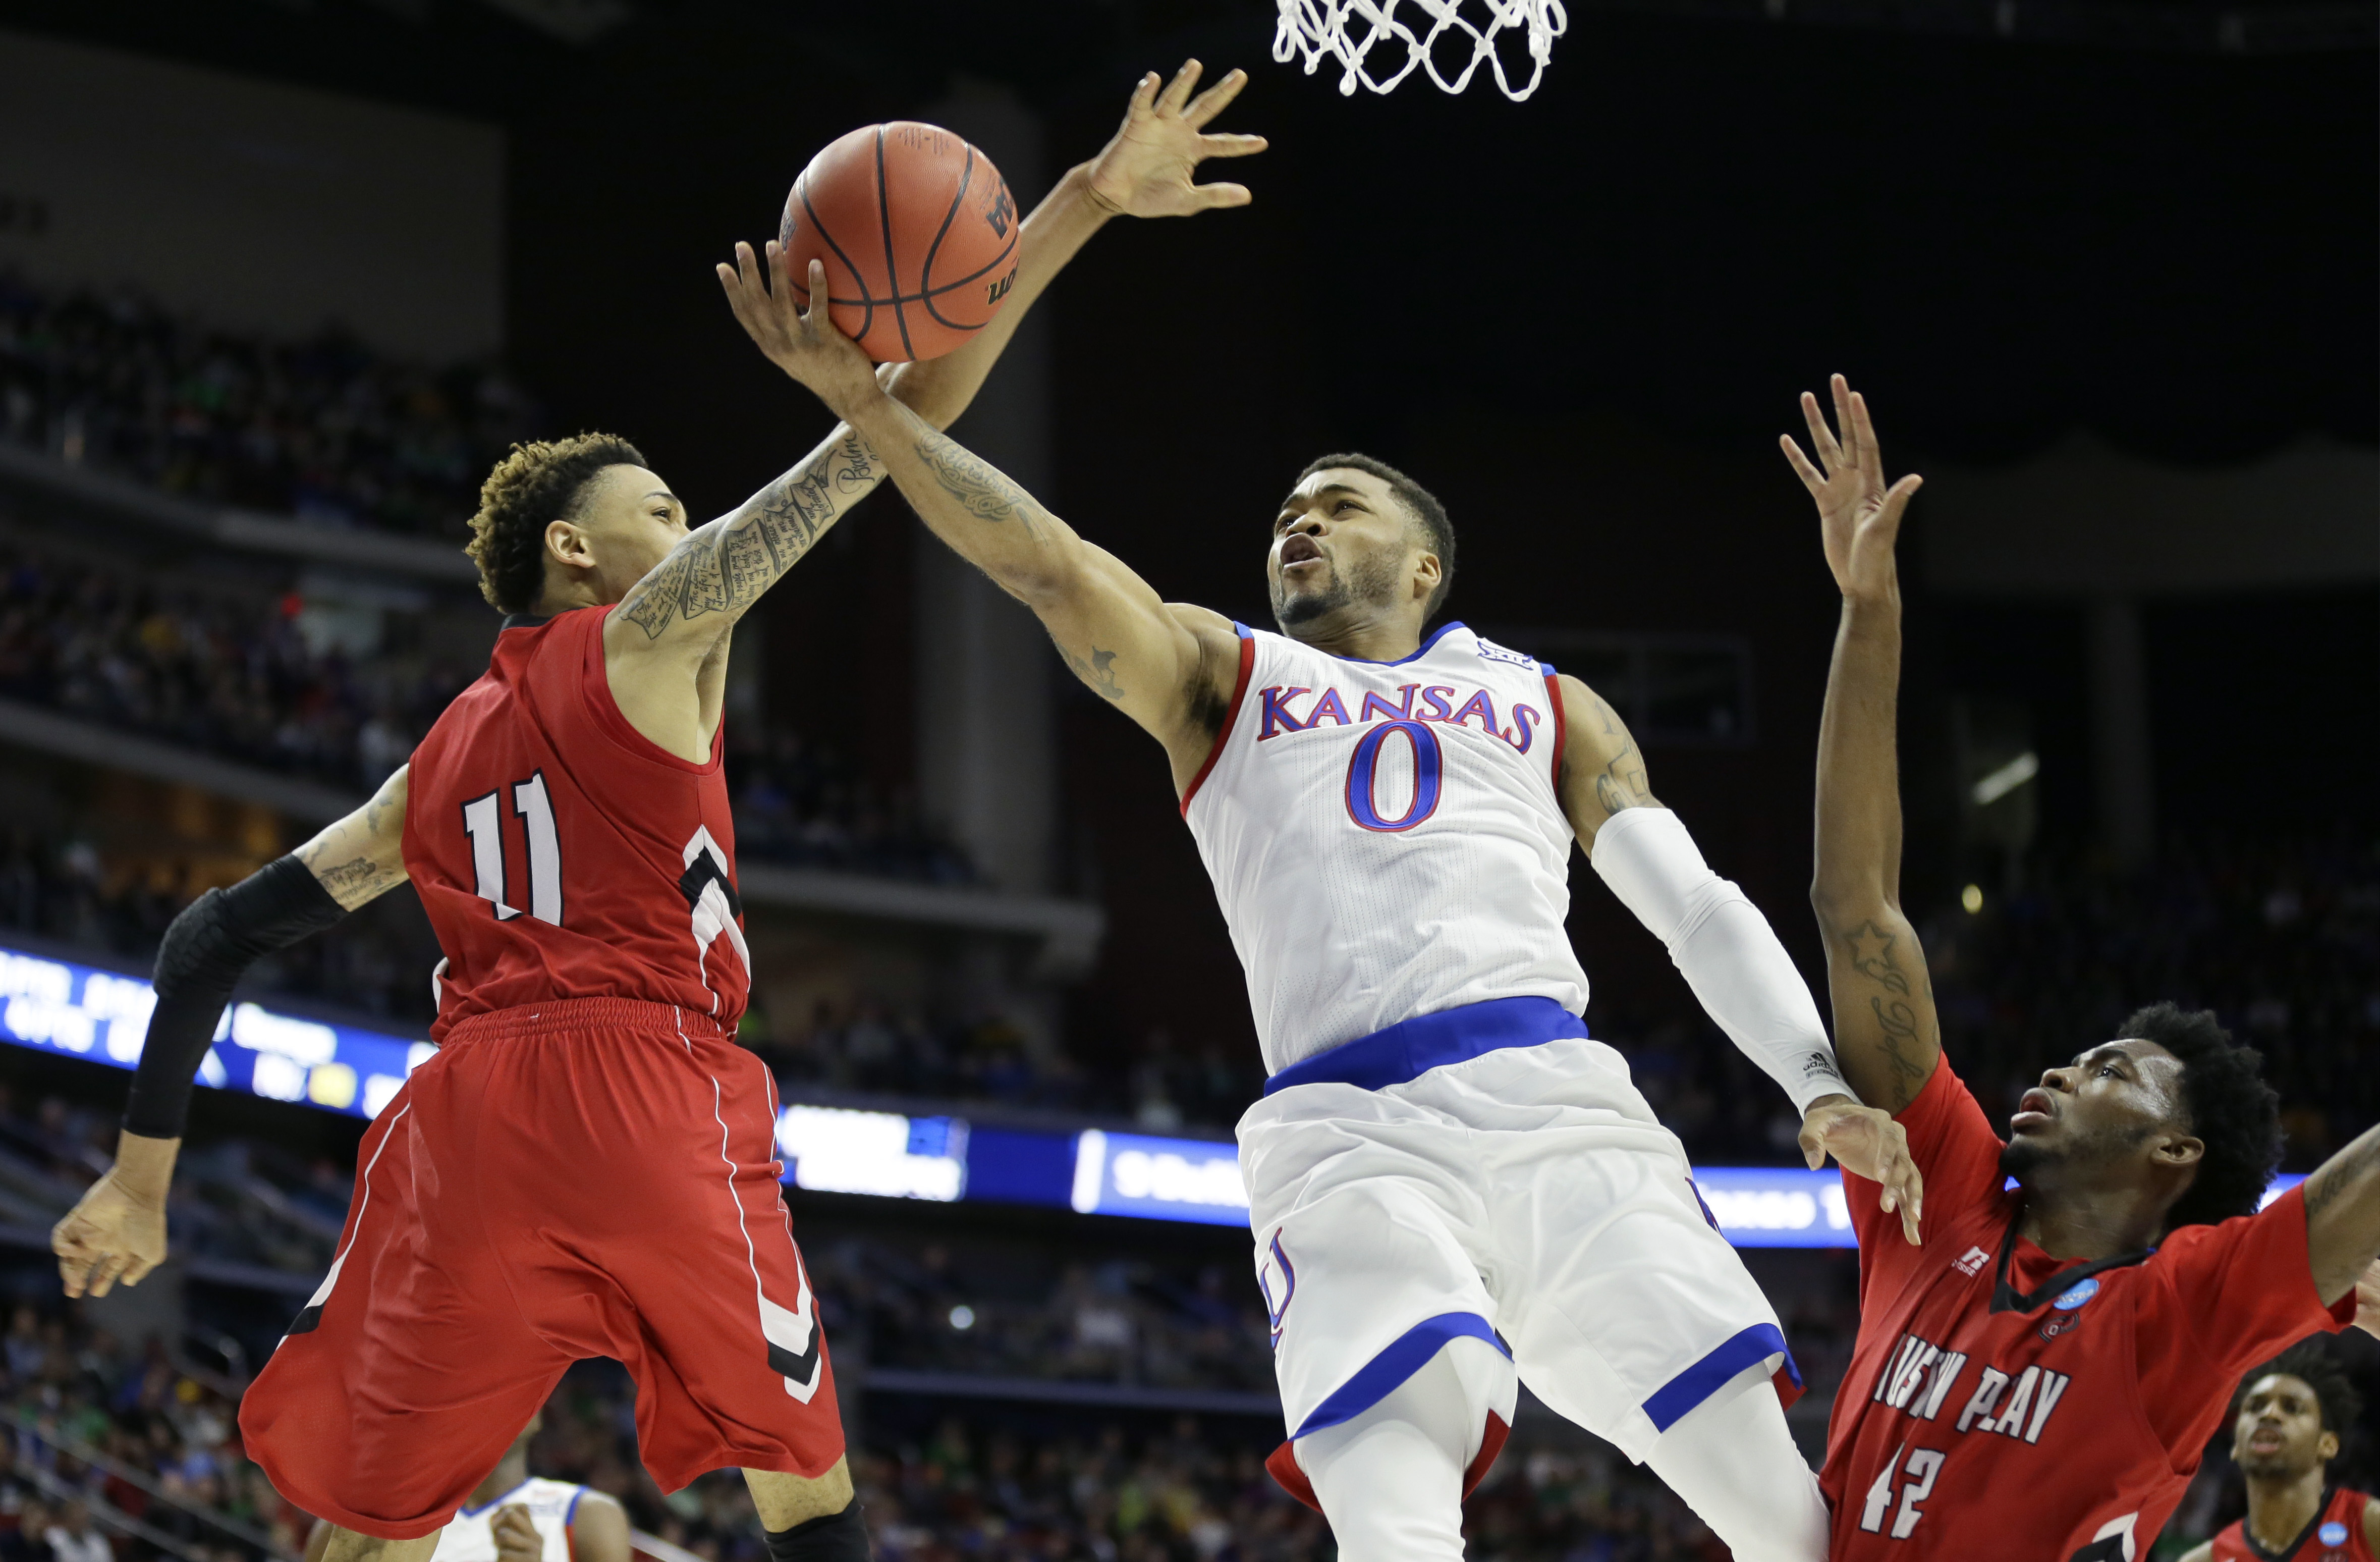 Kansas guard Frank Mason III, center, drives to the basket between Austin Peay defenders Khalil Davis, left, and Kenny Jones, right, during the first half of a first-round men's college basketball game in the NCAA Tournament, Thursday, March 17, 2016, in Des Moines, Iowa. (AP Photo/Charlie Neibergall)